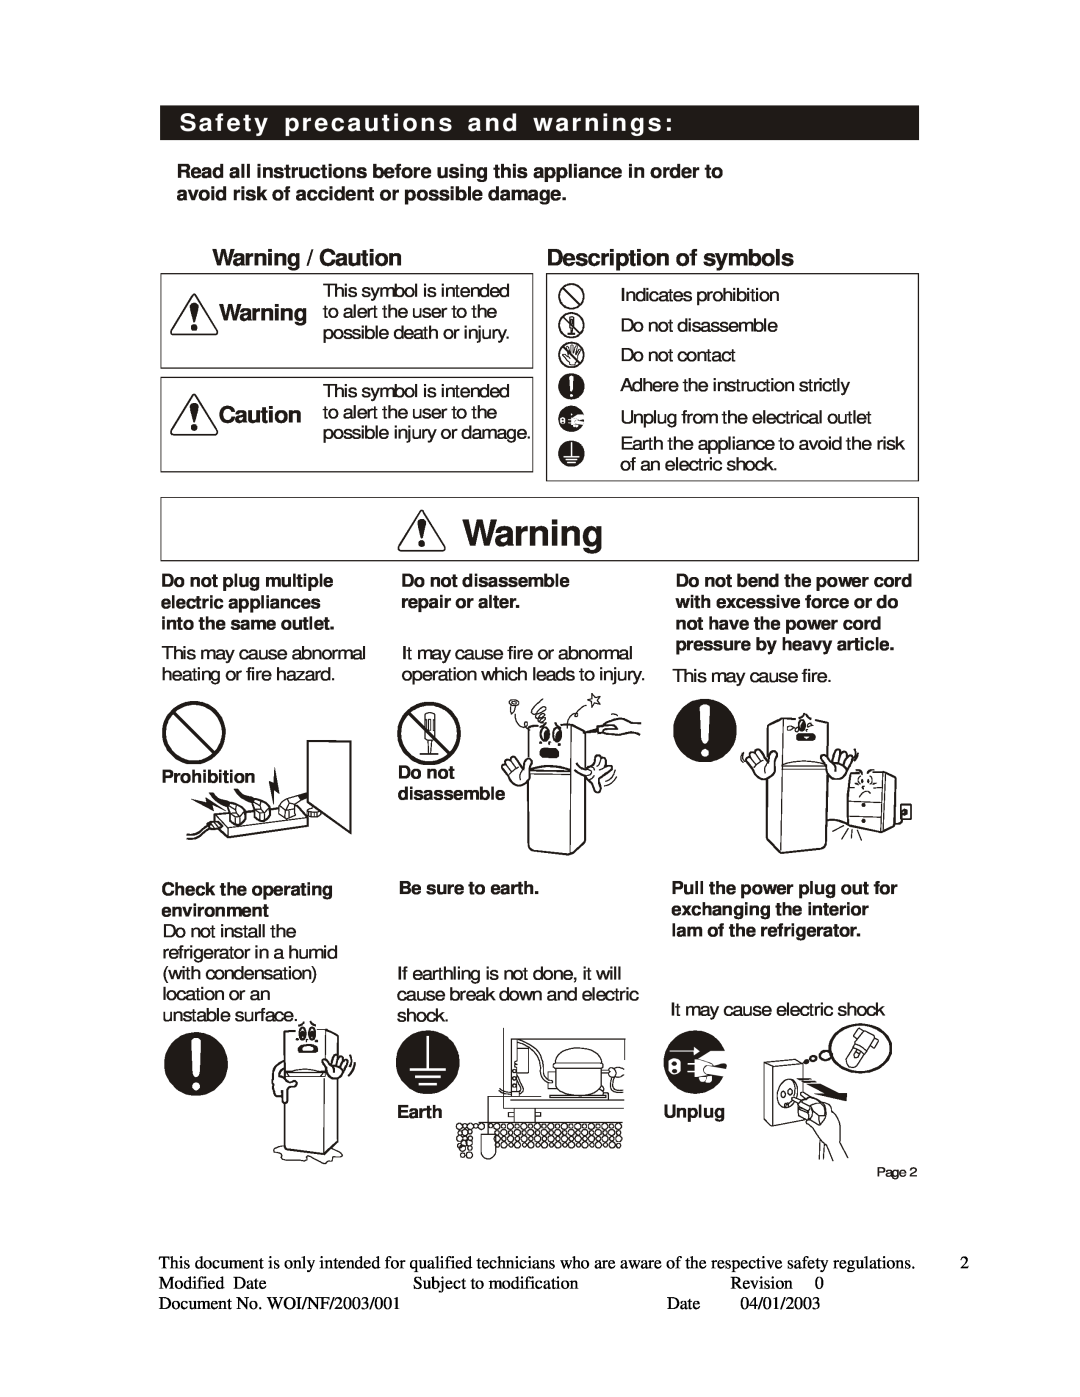 Whirlpool WRNE322 specifications Safety precautions and warnings, Warning / Caution, Description of symbols 